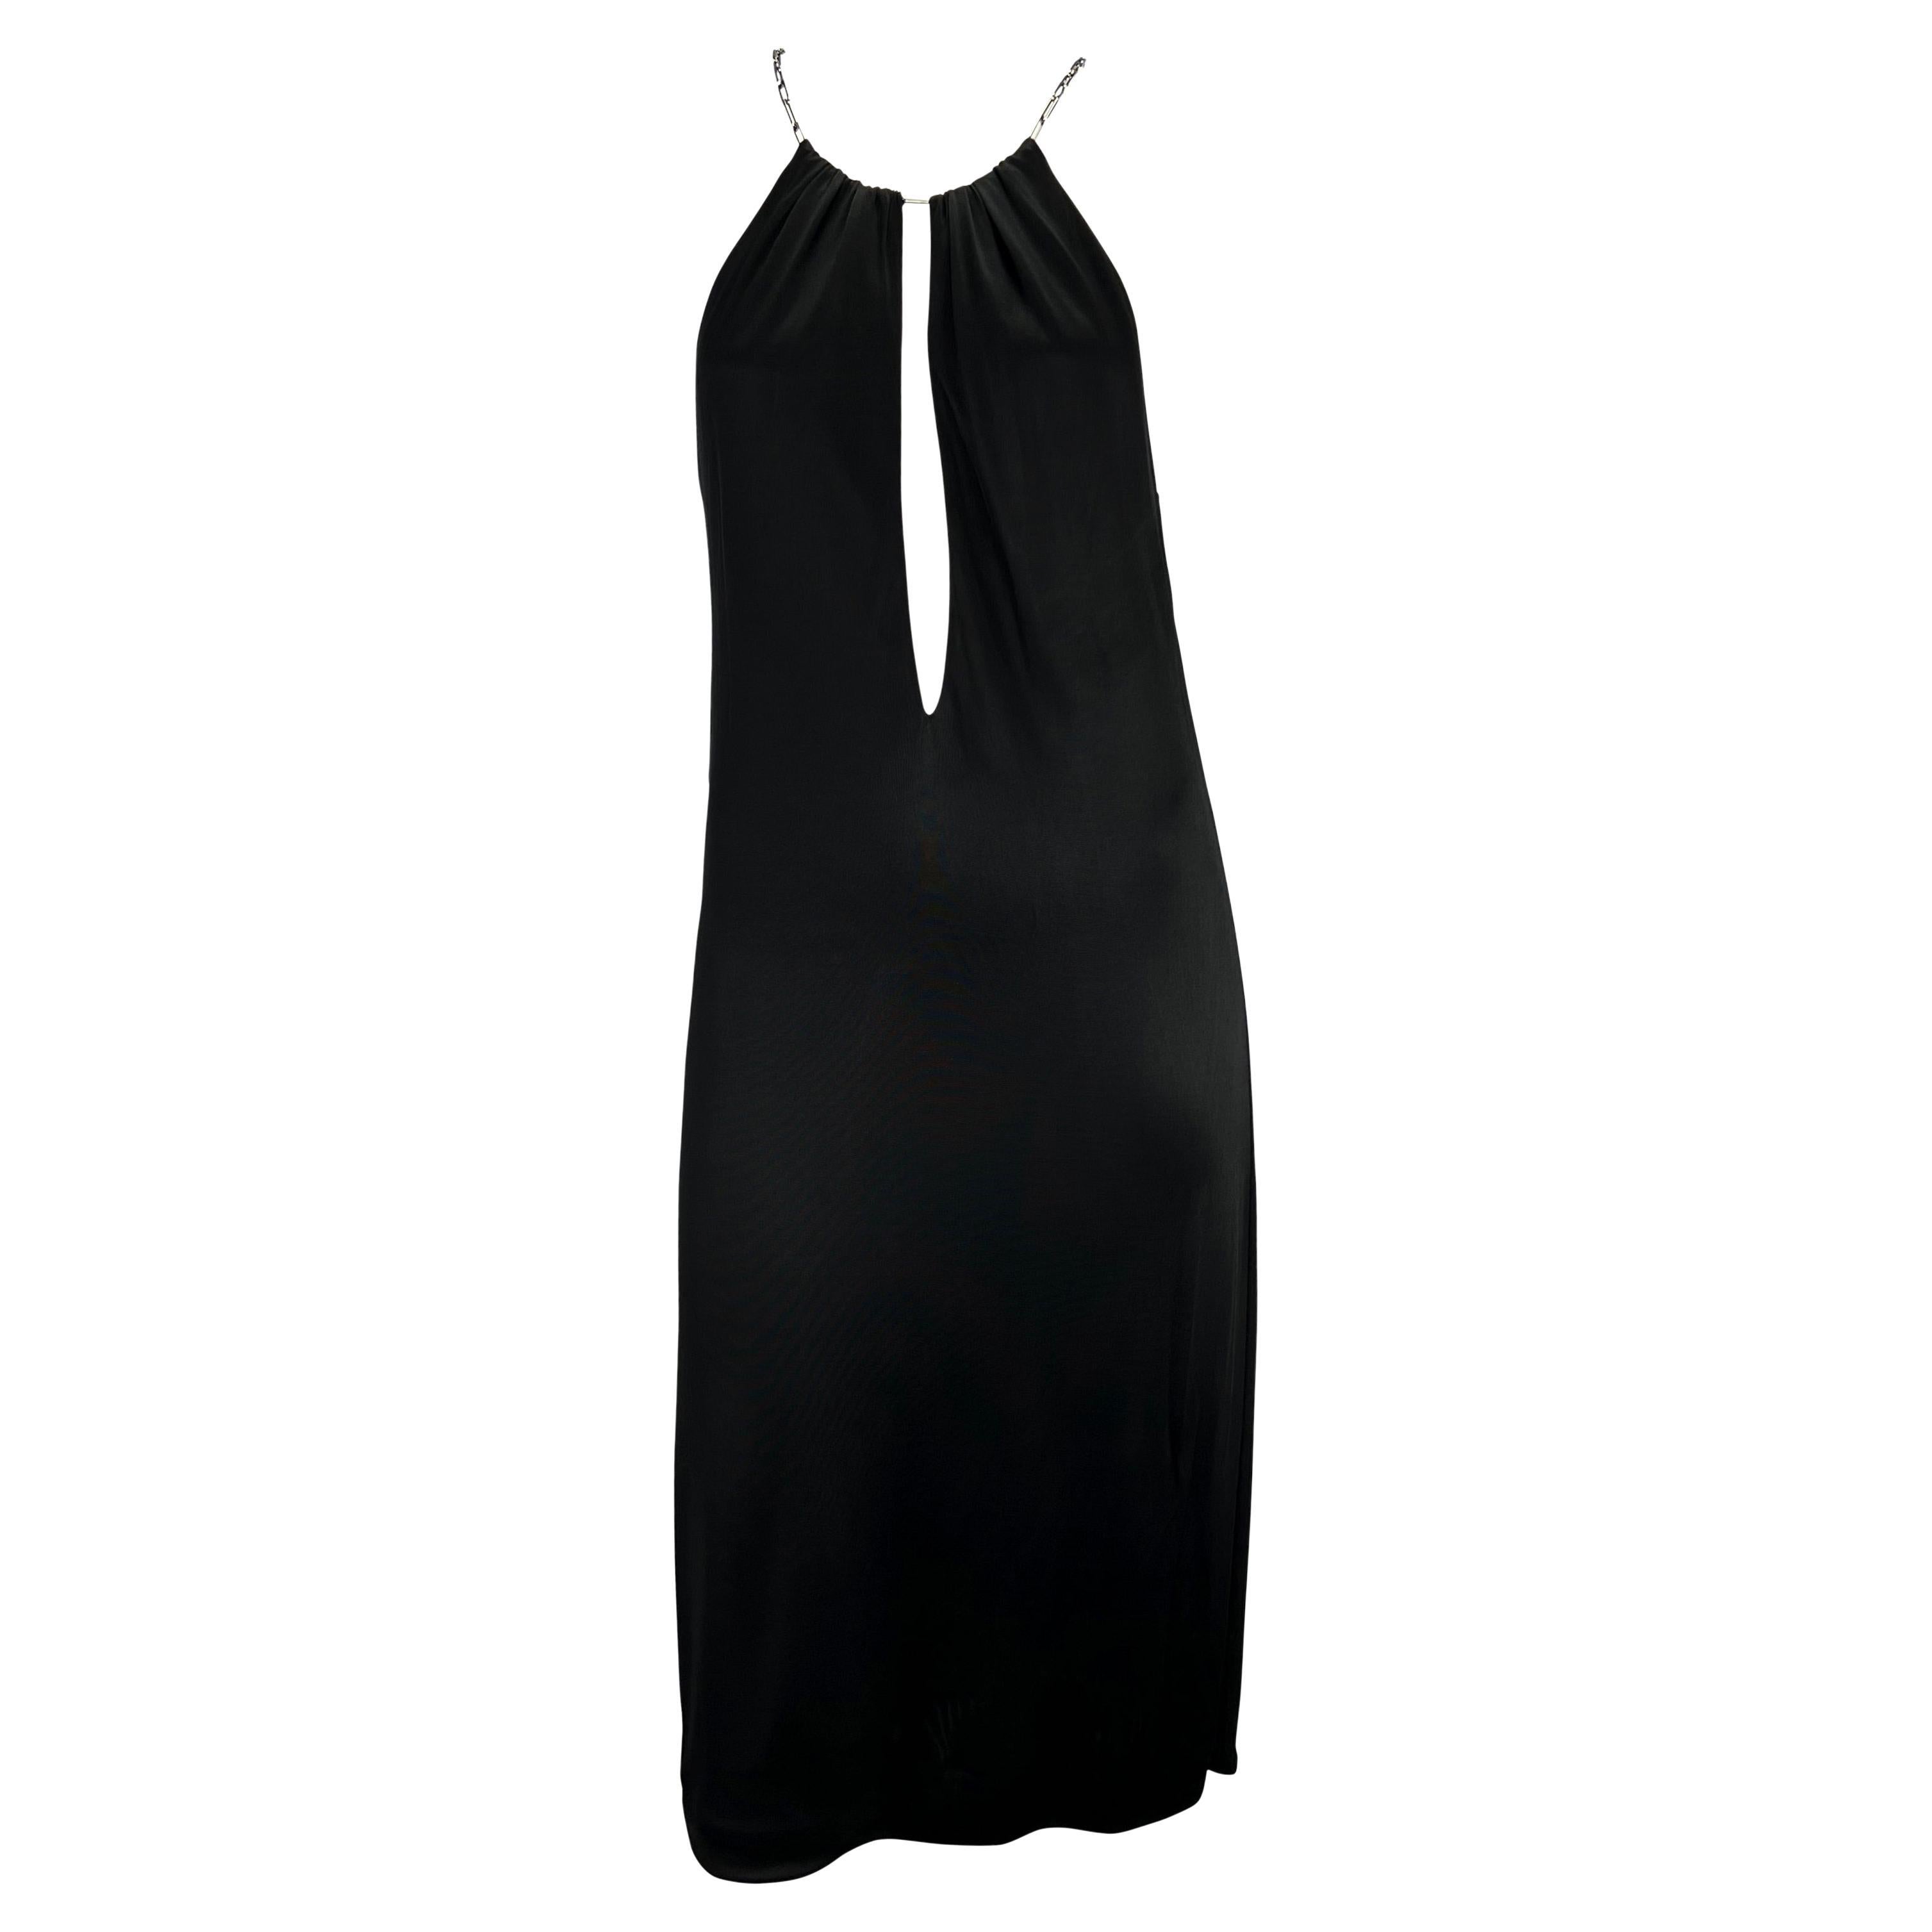 S/S 2000 Gucci by Tom Ford Black Viscose Chain Plunge Sleeveless Dress For Sale